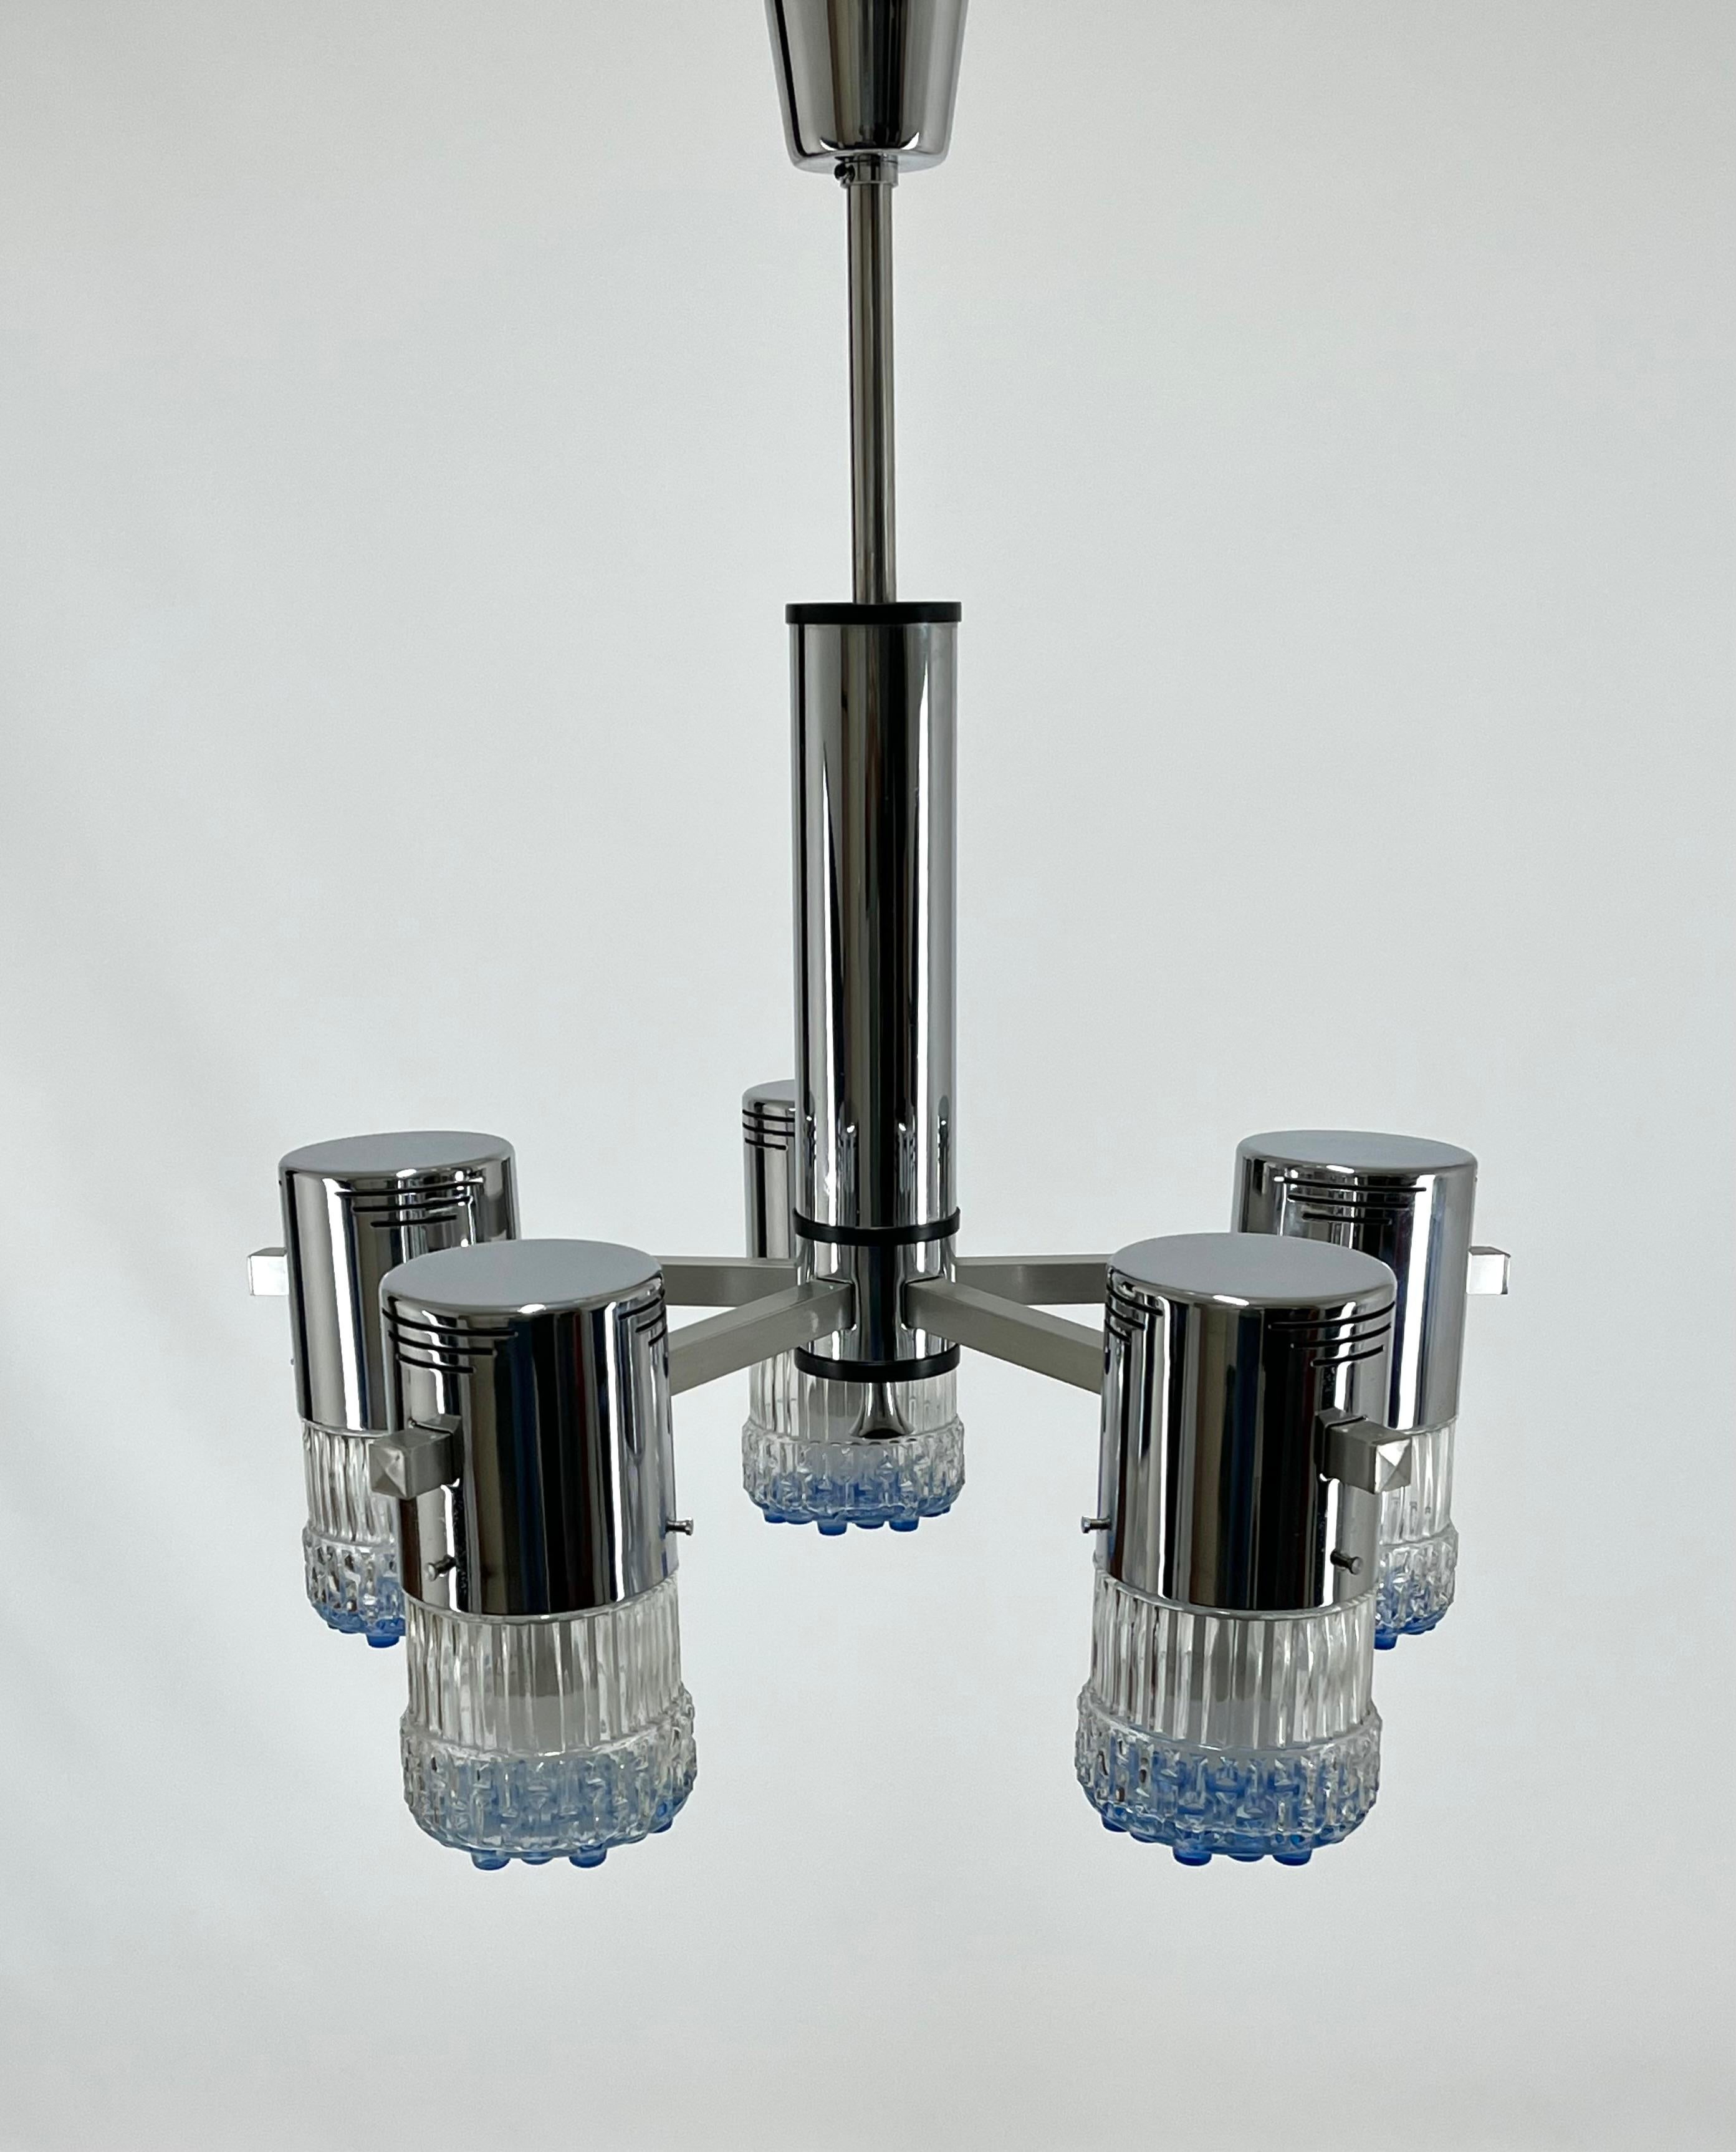 Italian mid-century 5 lights italian chandelier in chrome and glass For Sale